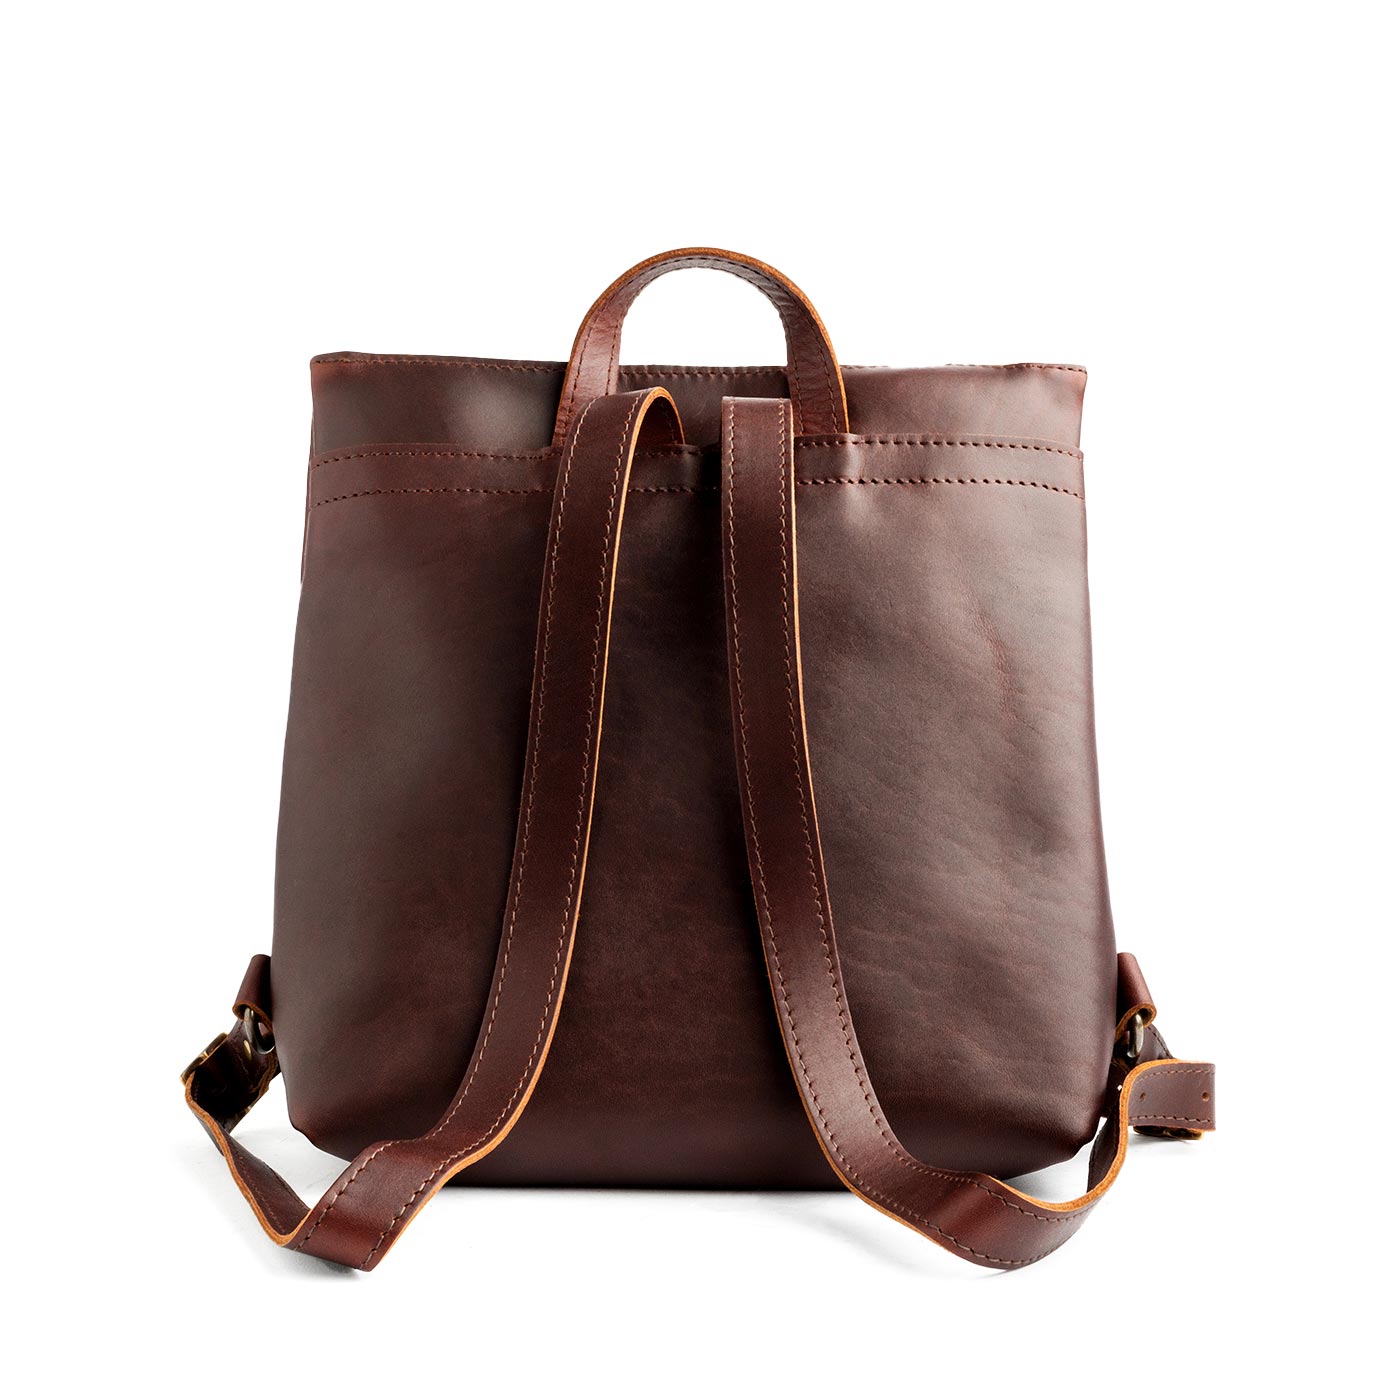 All Color: Cognac | handmade leather backpack tote